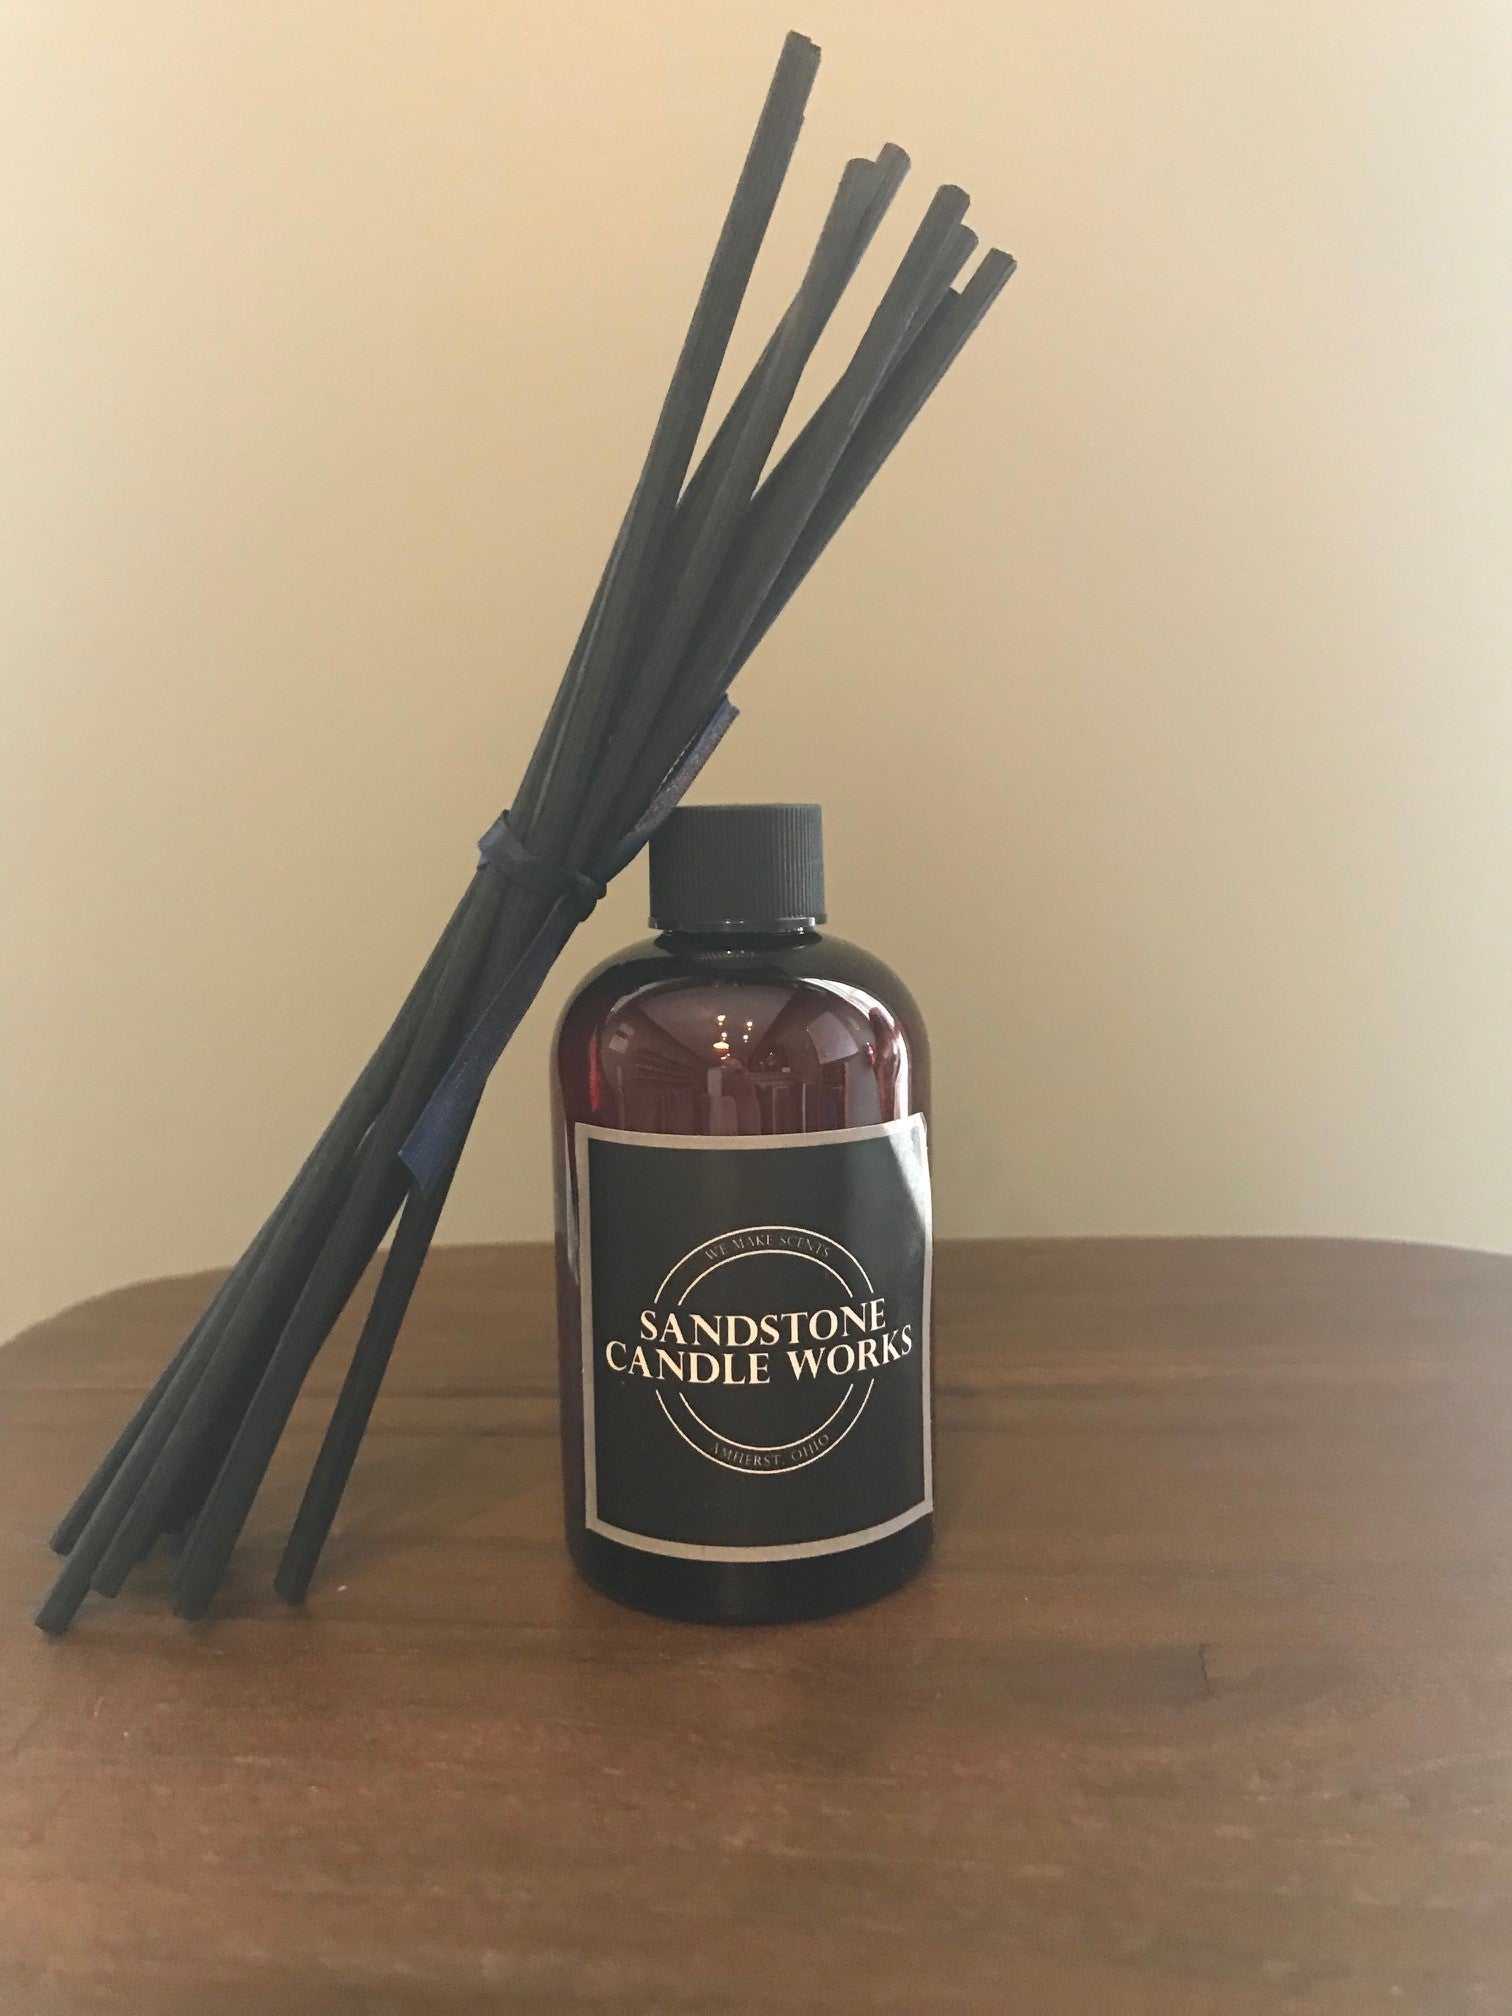 Pine - Reed Diffuser Oil - Refill